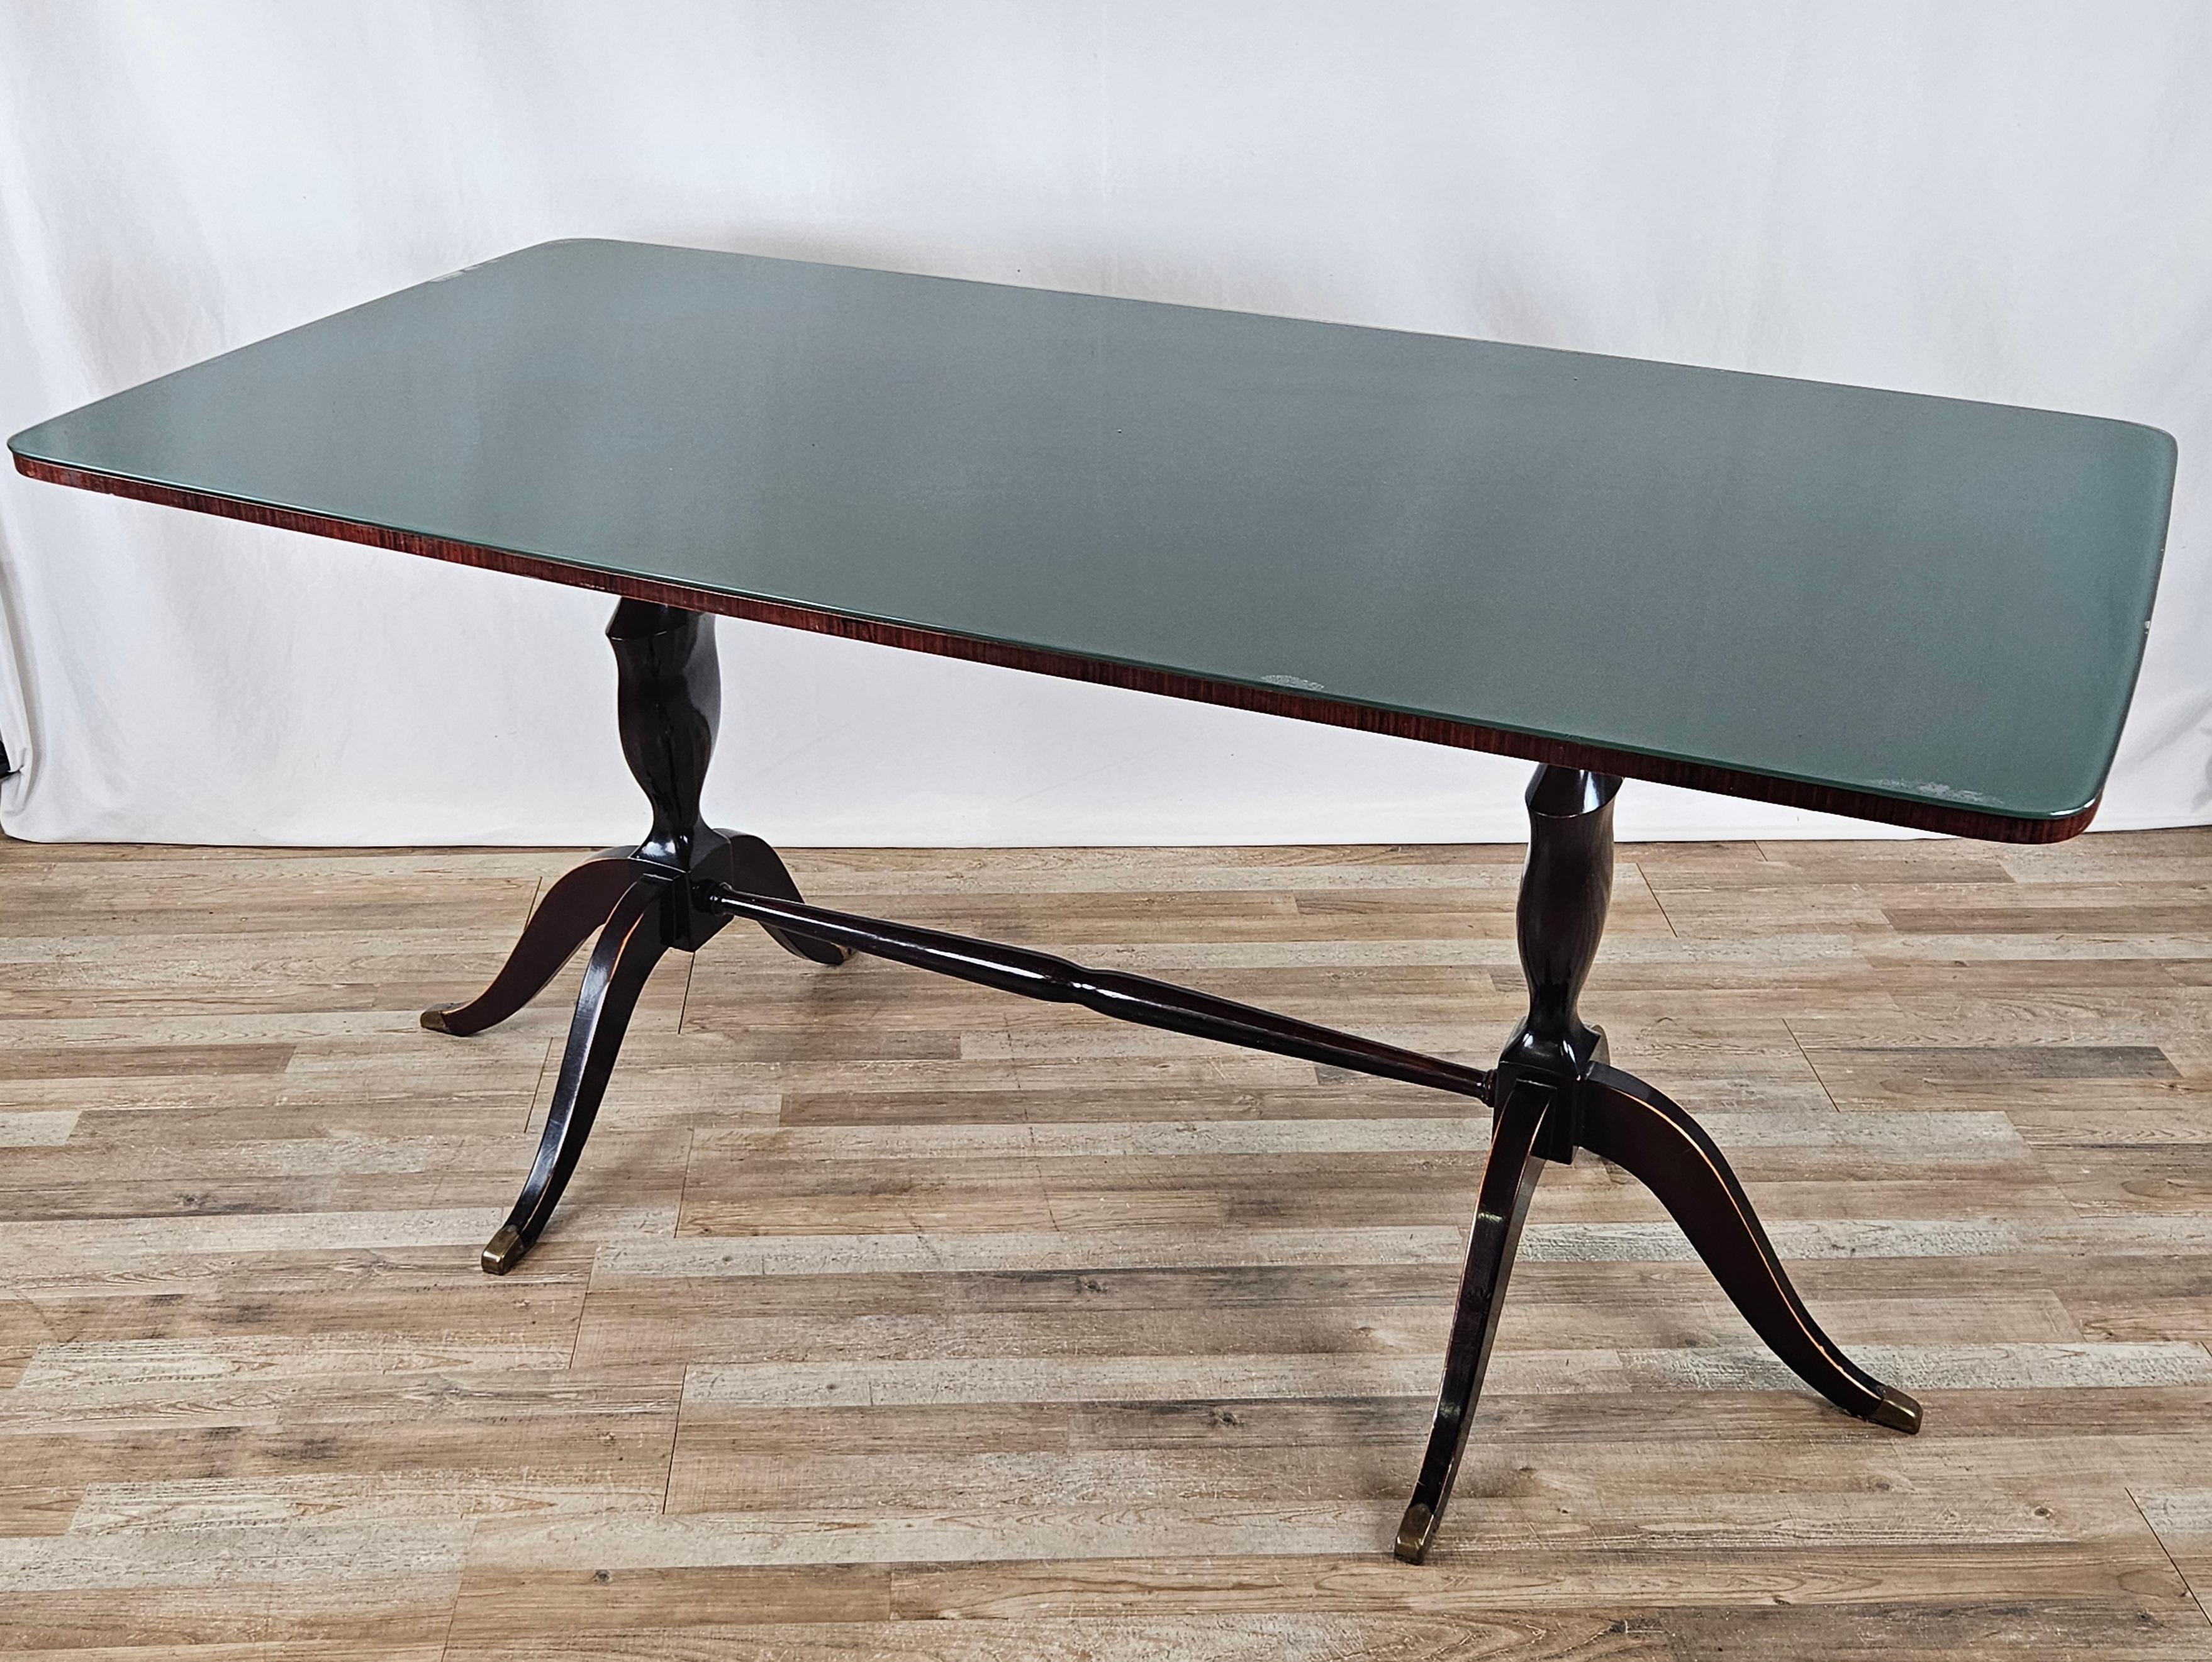 Mid-20th-century Italian dining table with a wooden frame decorated with brass foot finials and a beautiful green glass top.

Perfect in a living room or kitchen with a vintage and modern flavor, it can be combined with a variety of seating